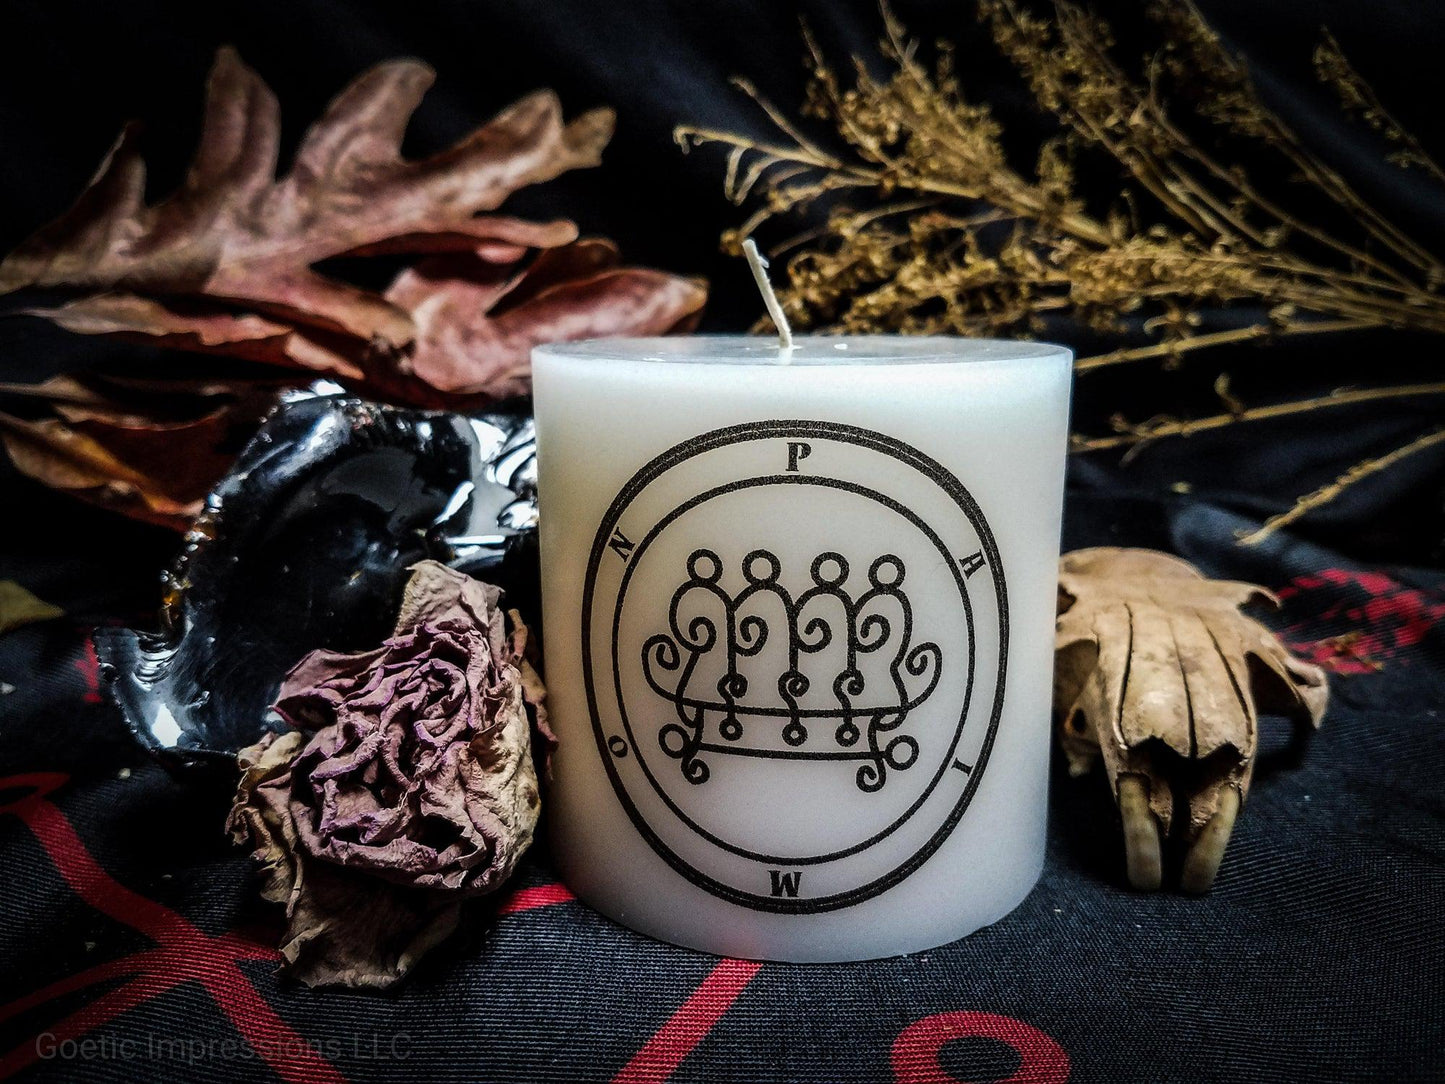 Black and White Paimon seal on a white candle